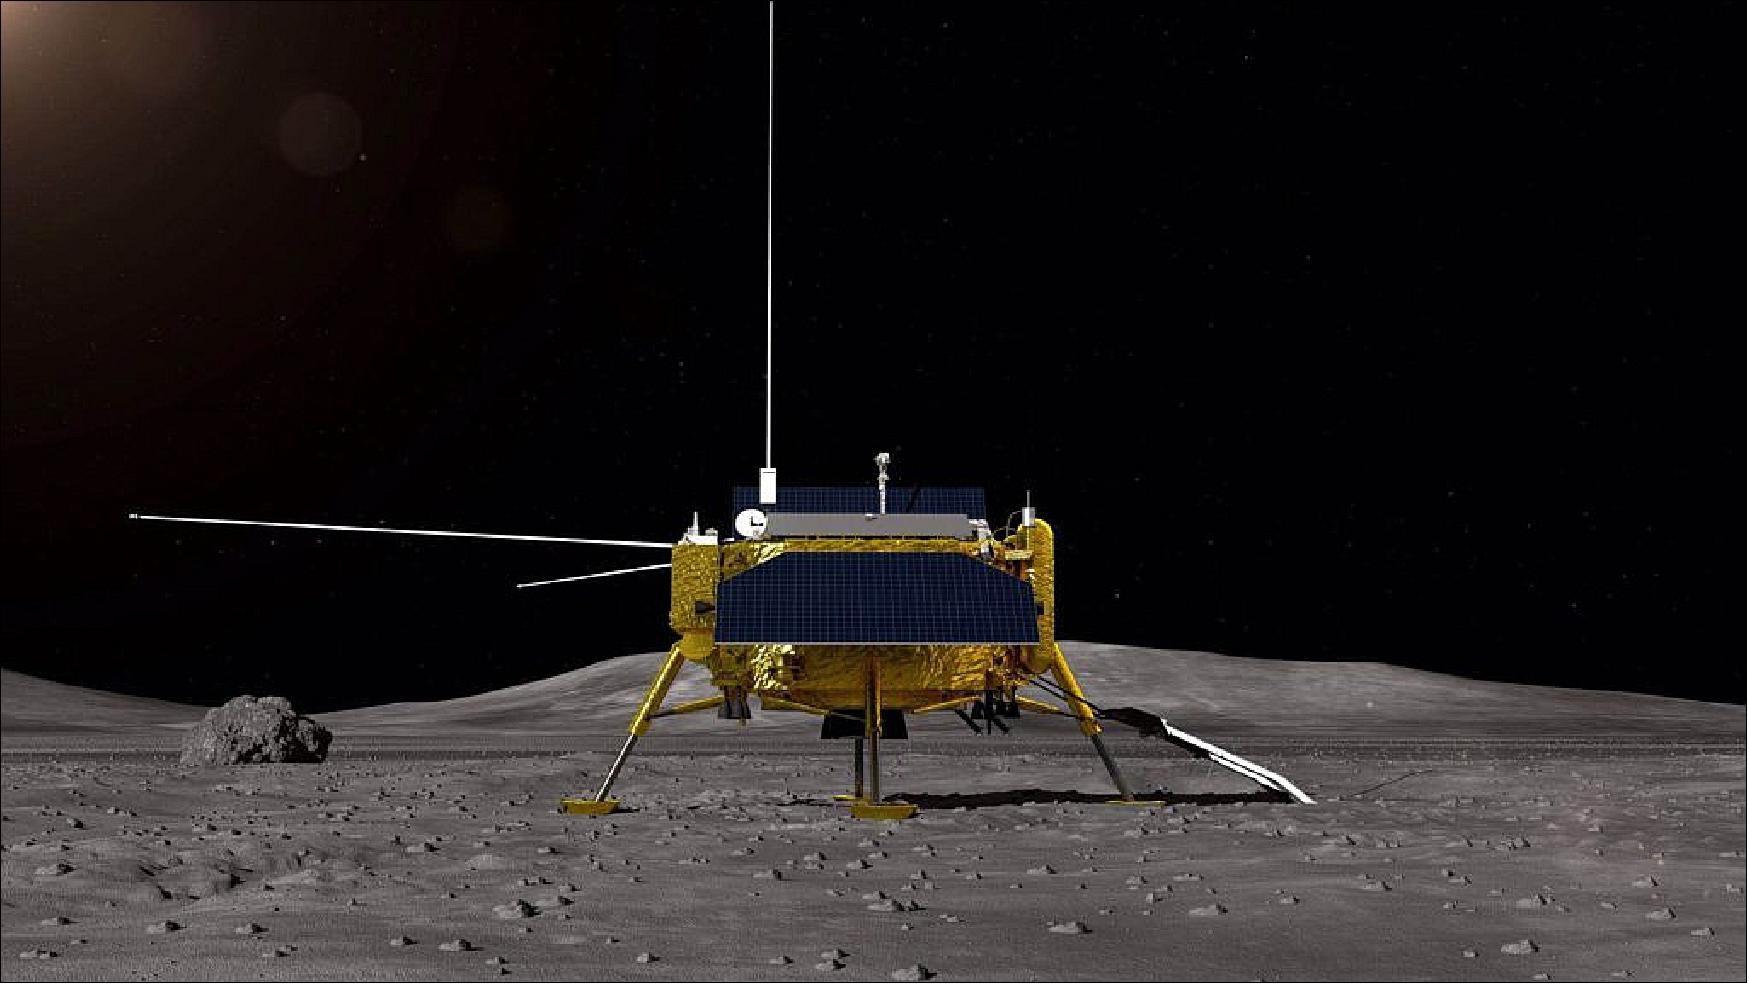 Figure 6: Artist's rendering of the Chang’e-4 lunar far side lander, released in August 2018 (image credit: CNSA, CASC)